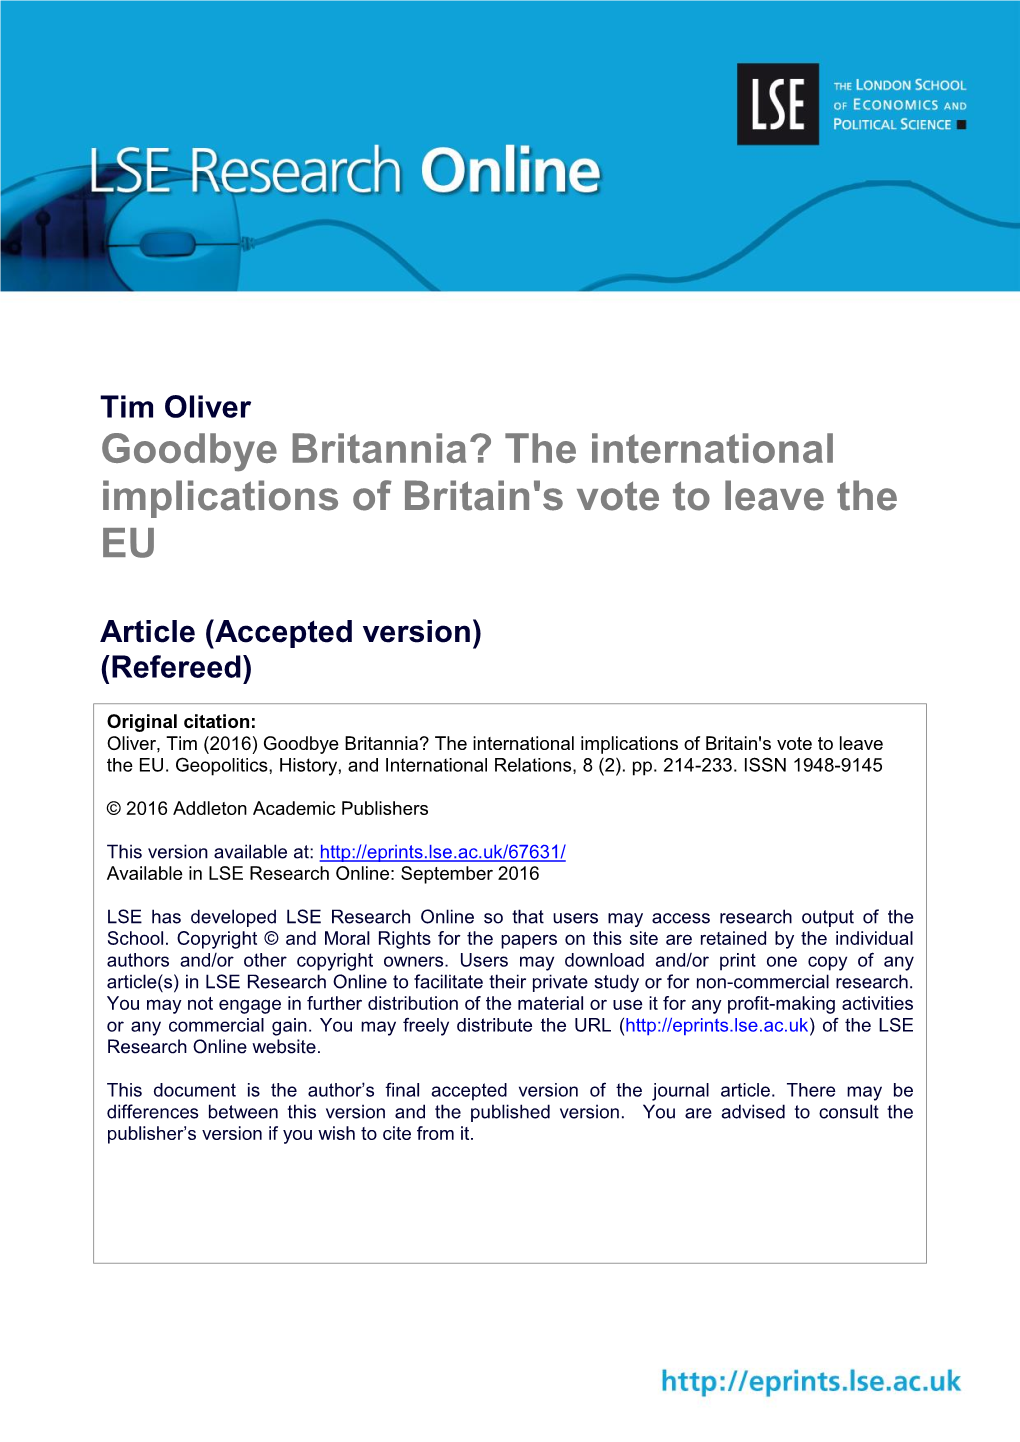 The International Implications of Britain's Vote to Leave the EU